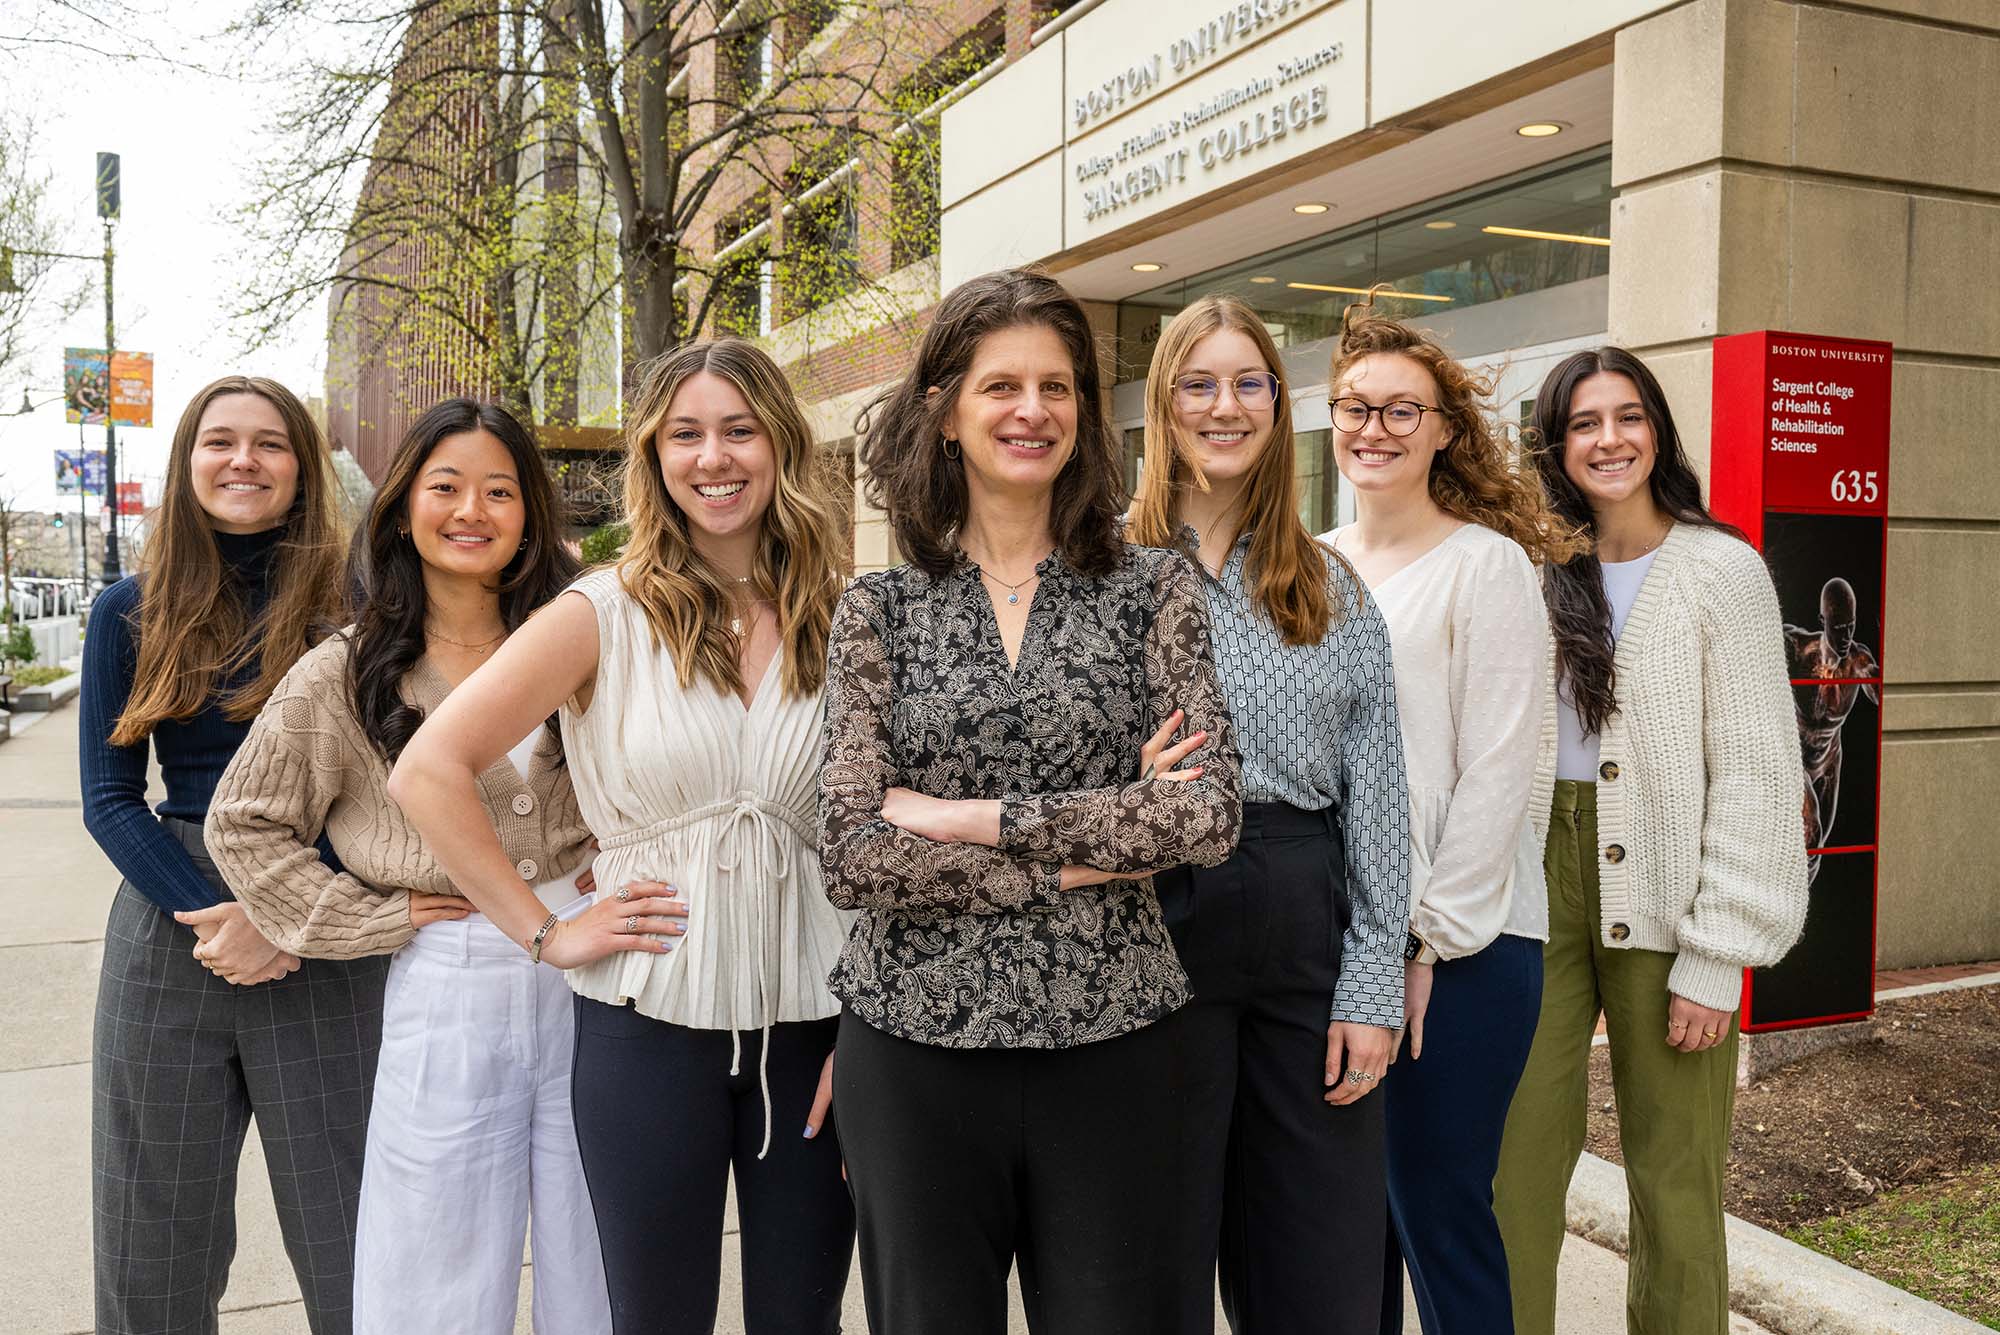 Photo: A photo of seven women posing outside of a building that says "Boston University Sargent College"